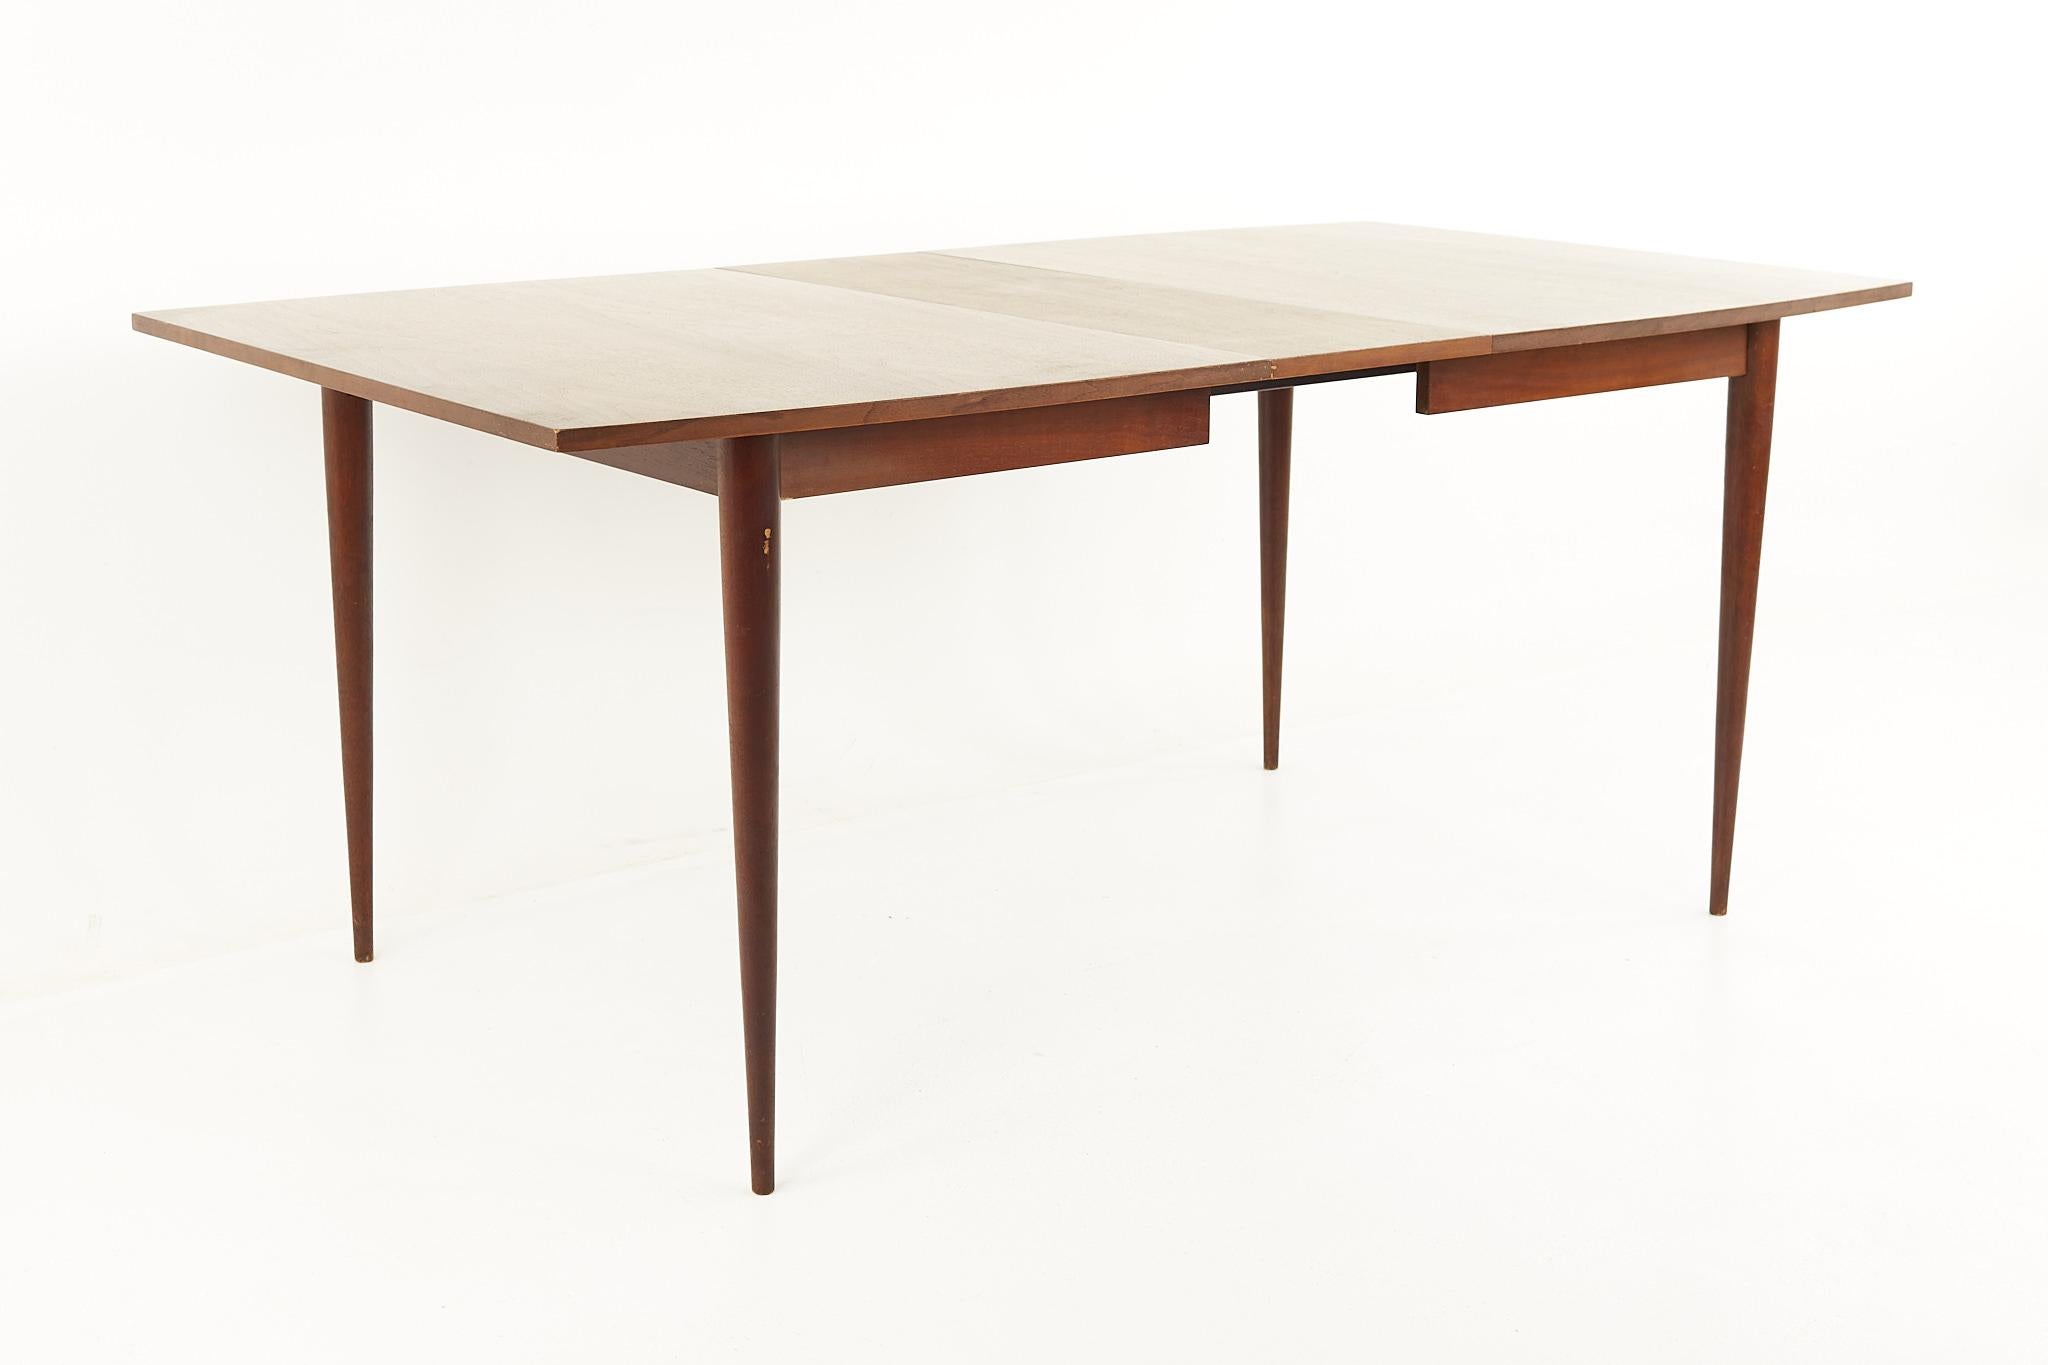 Broyhill Sculptra Mid Century Walnut Dining Table with 3 Leaves In Good Condition For Sale In Countryside, IL